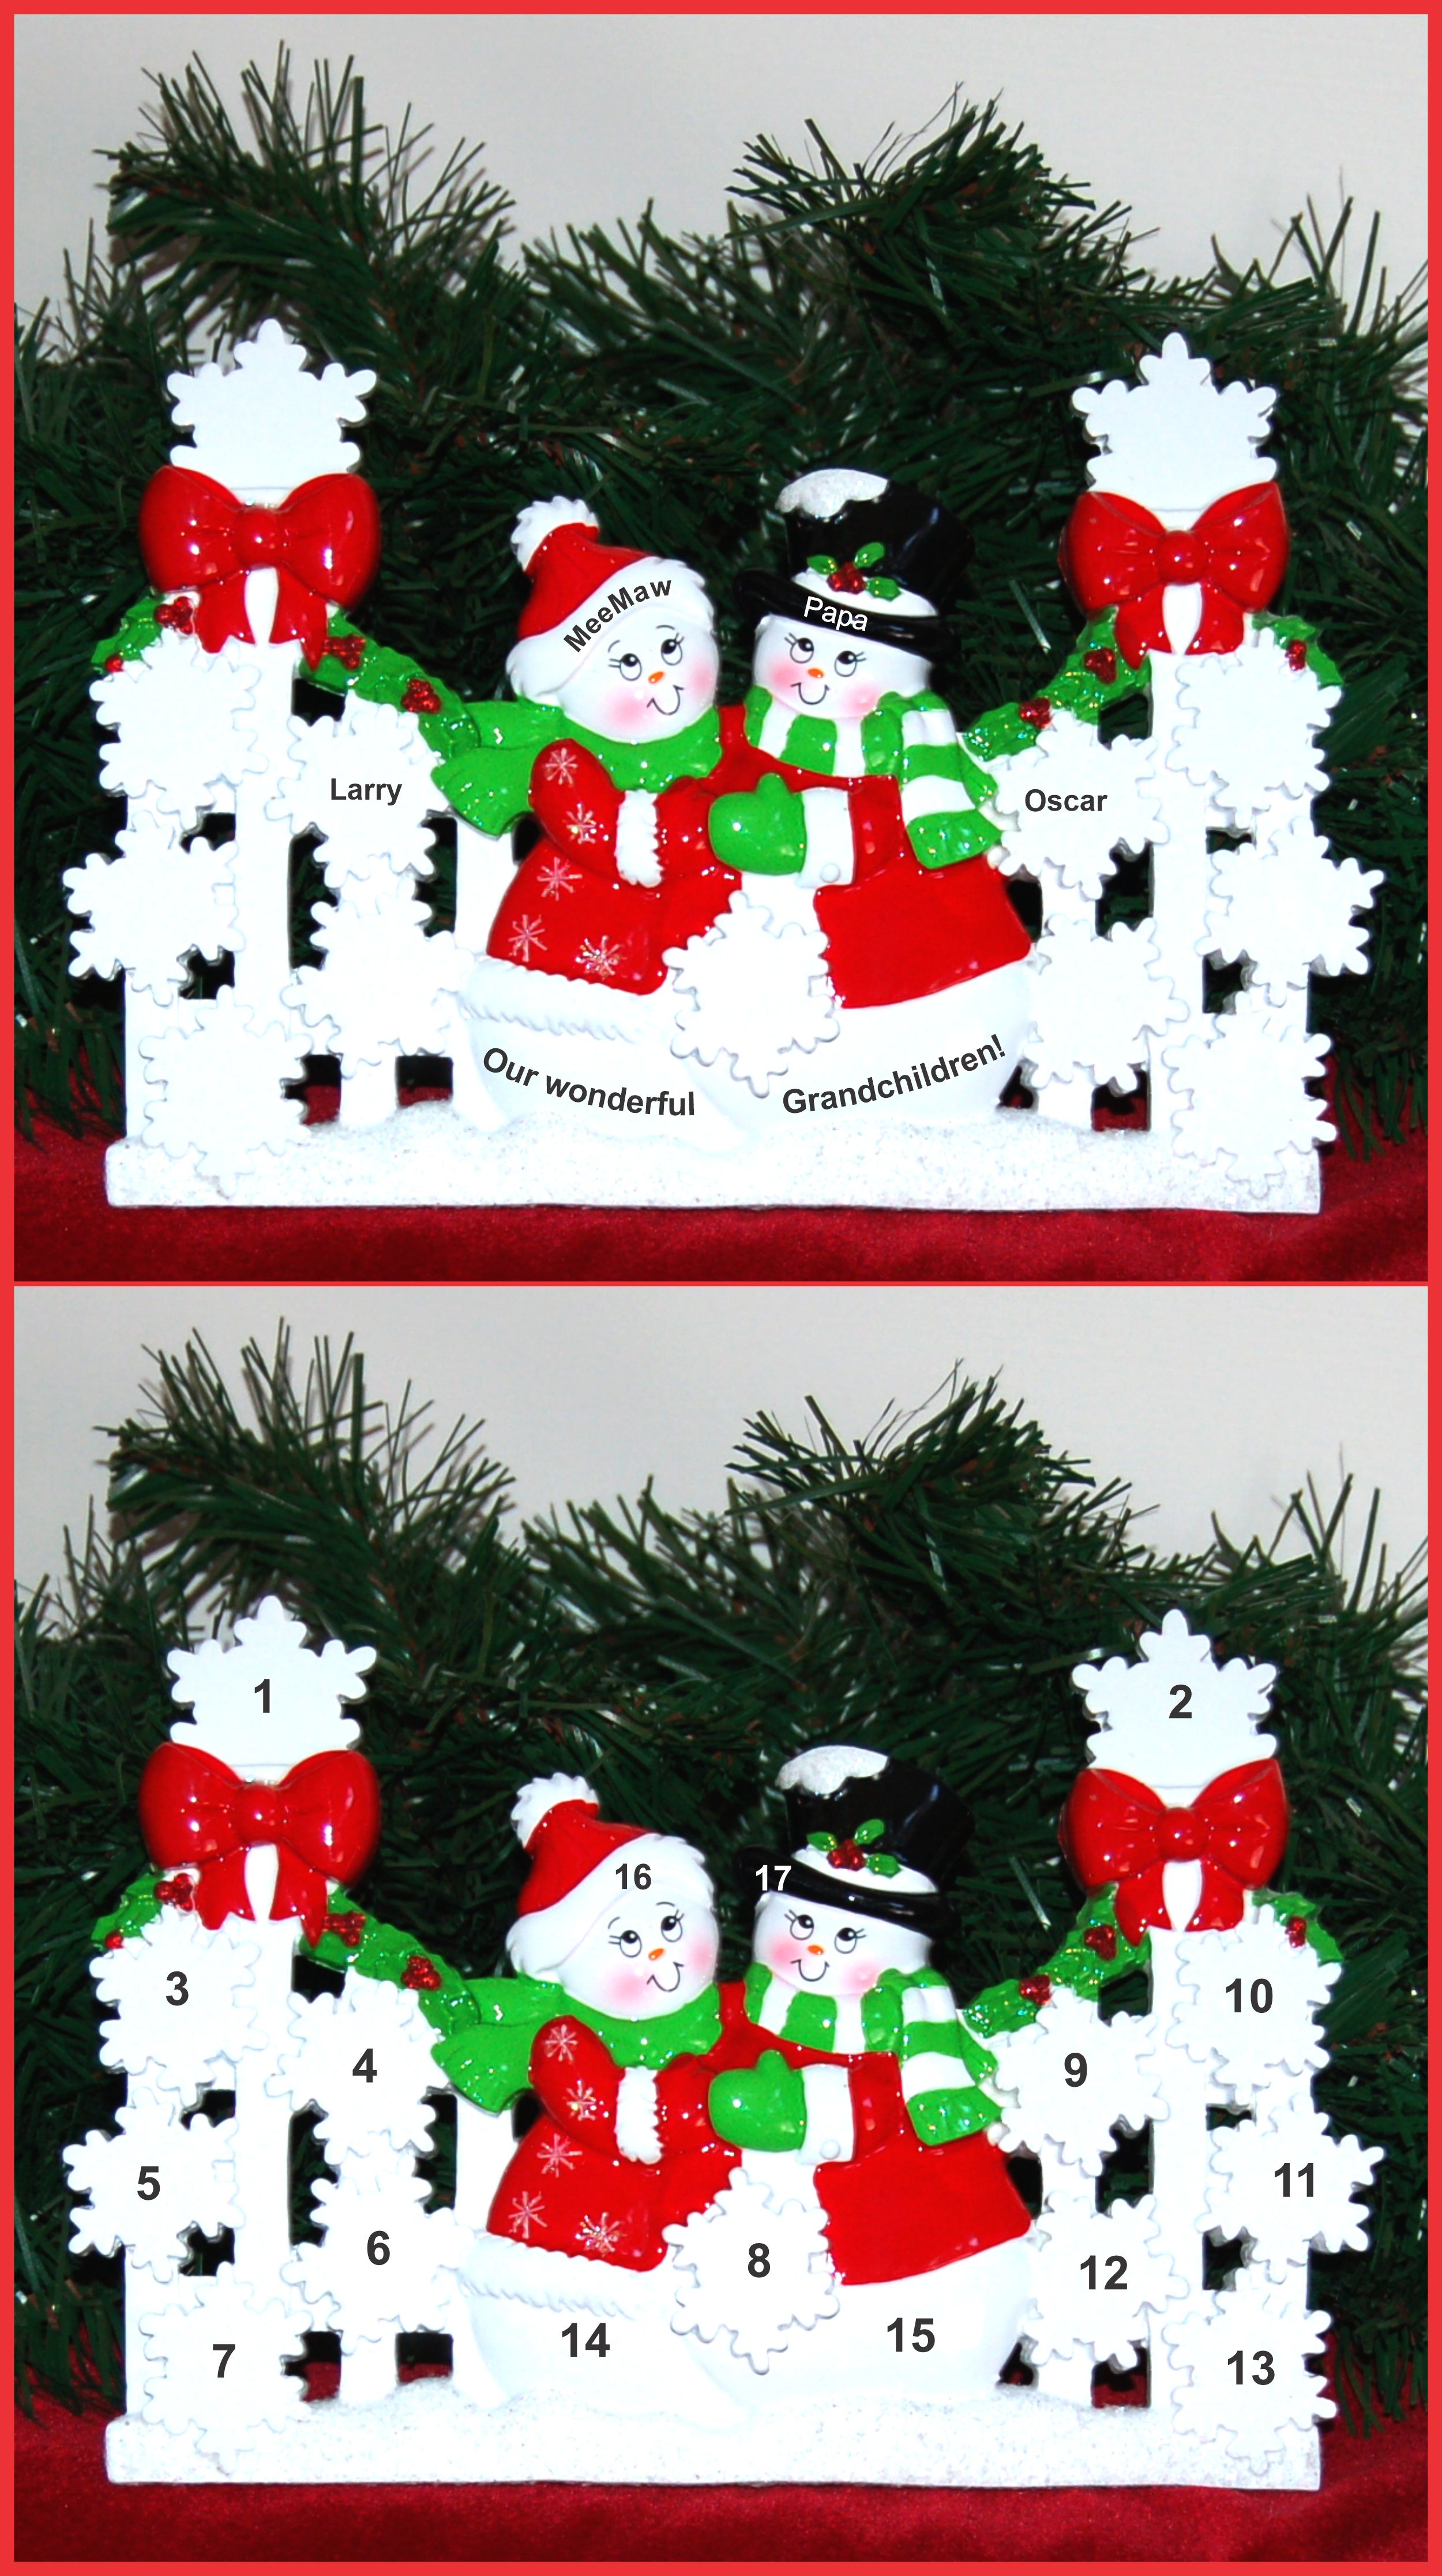 Grandparents Tabletop Christmas Decoration Snowflakes for 2 Grandchildren Personalized by RussellRhodes.com